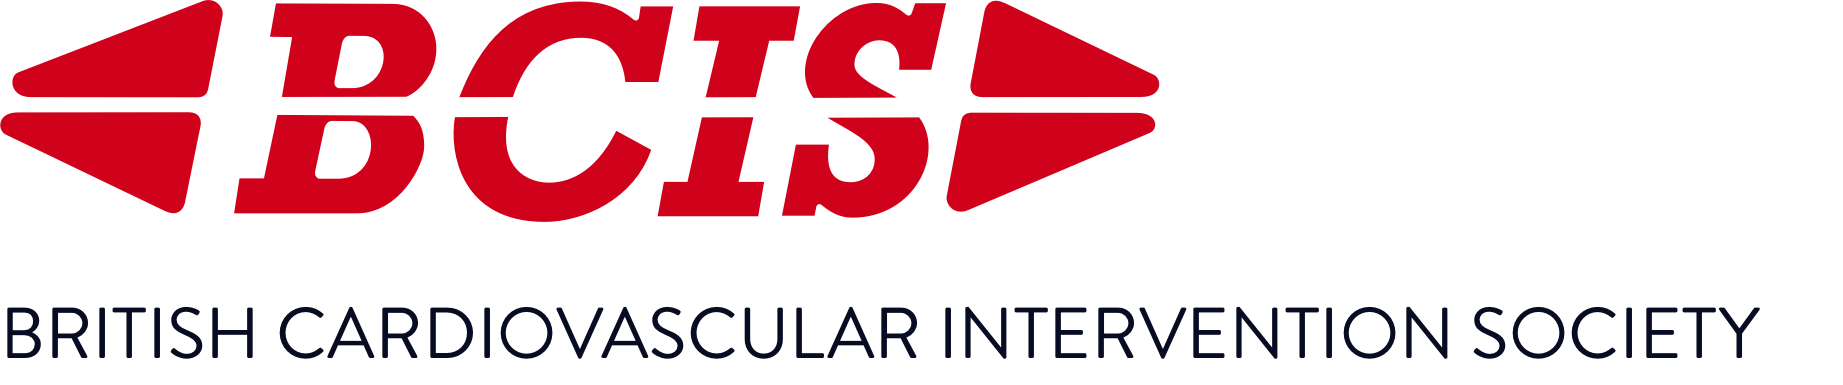 bcis-logo-red-strap